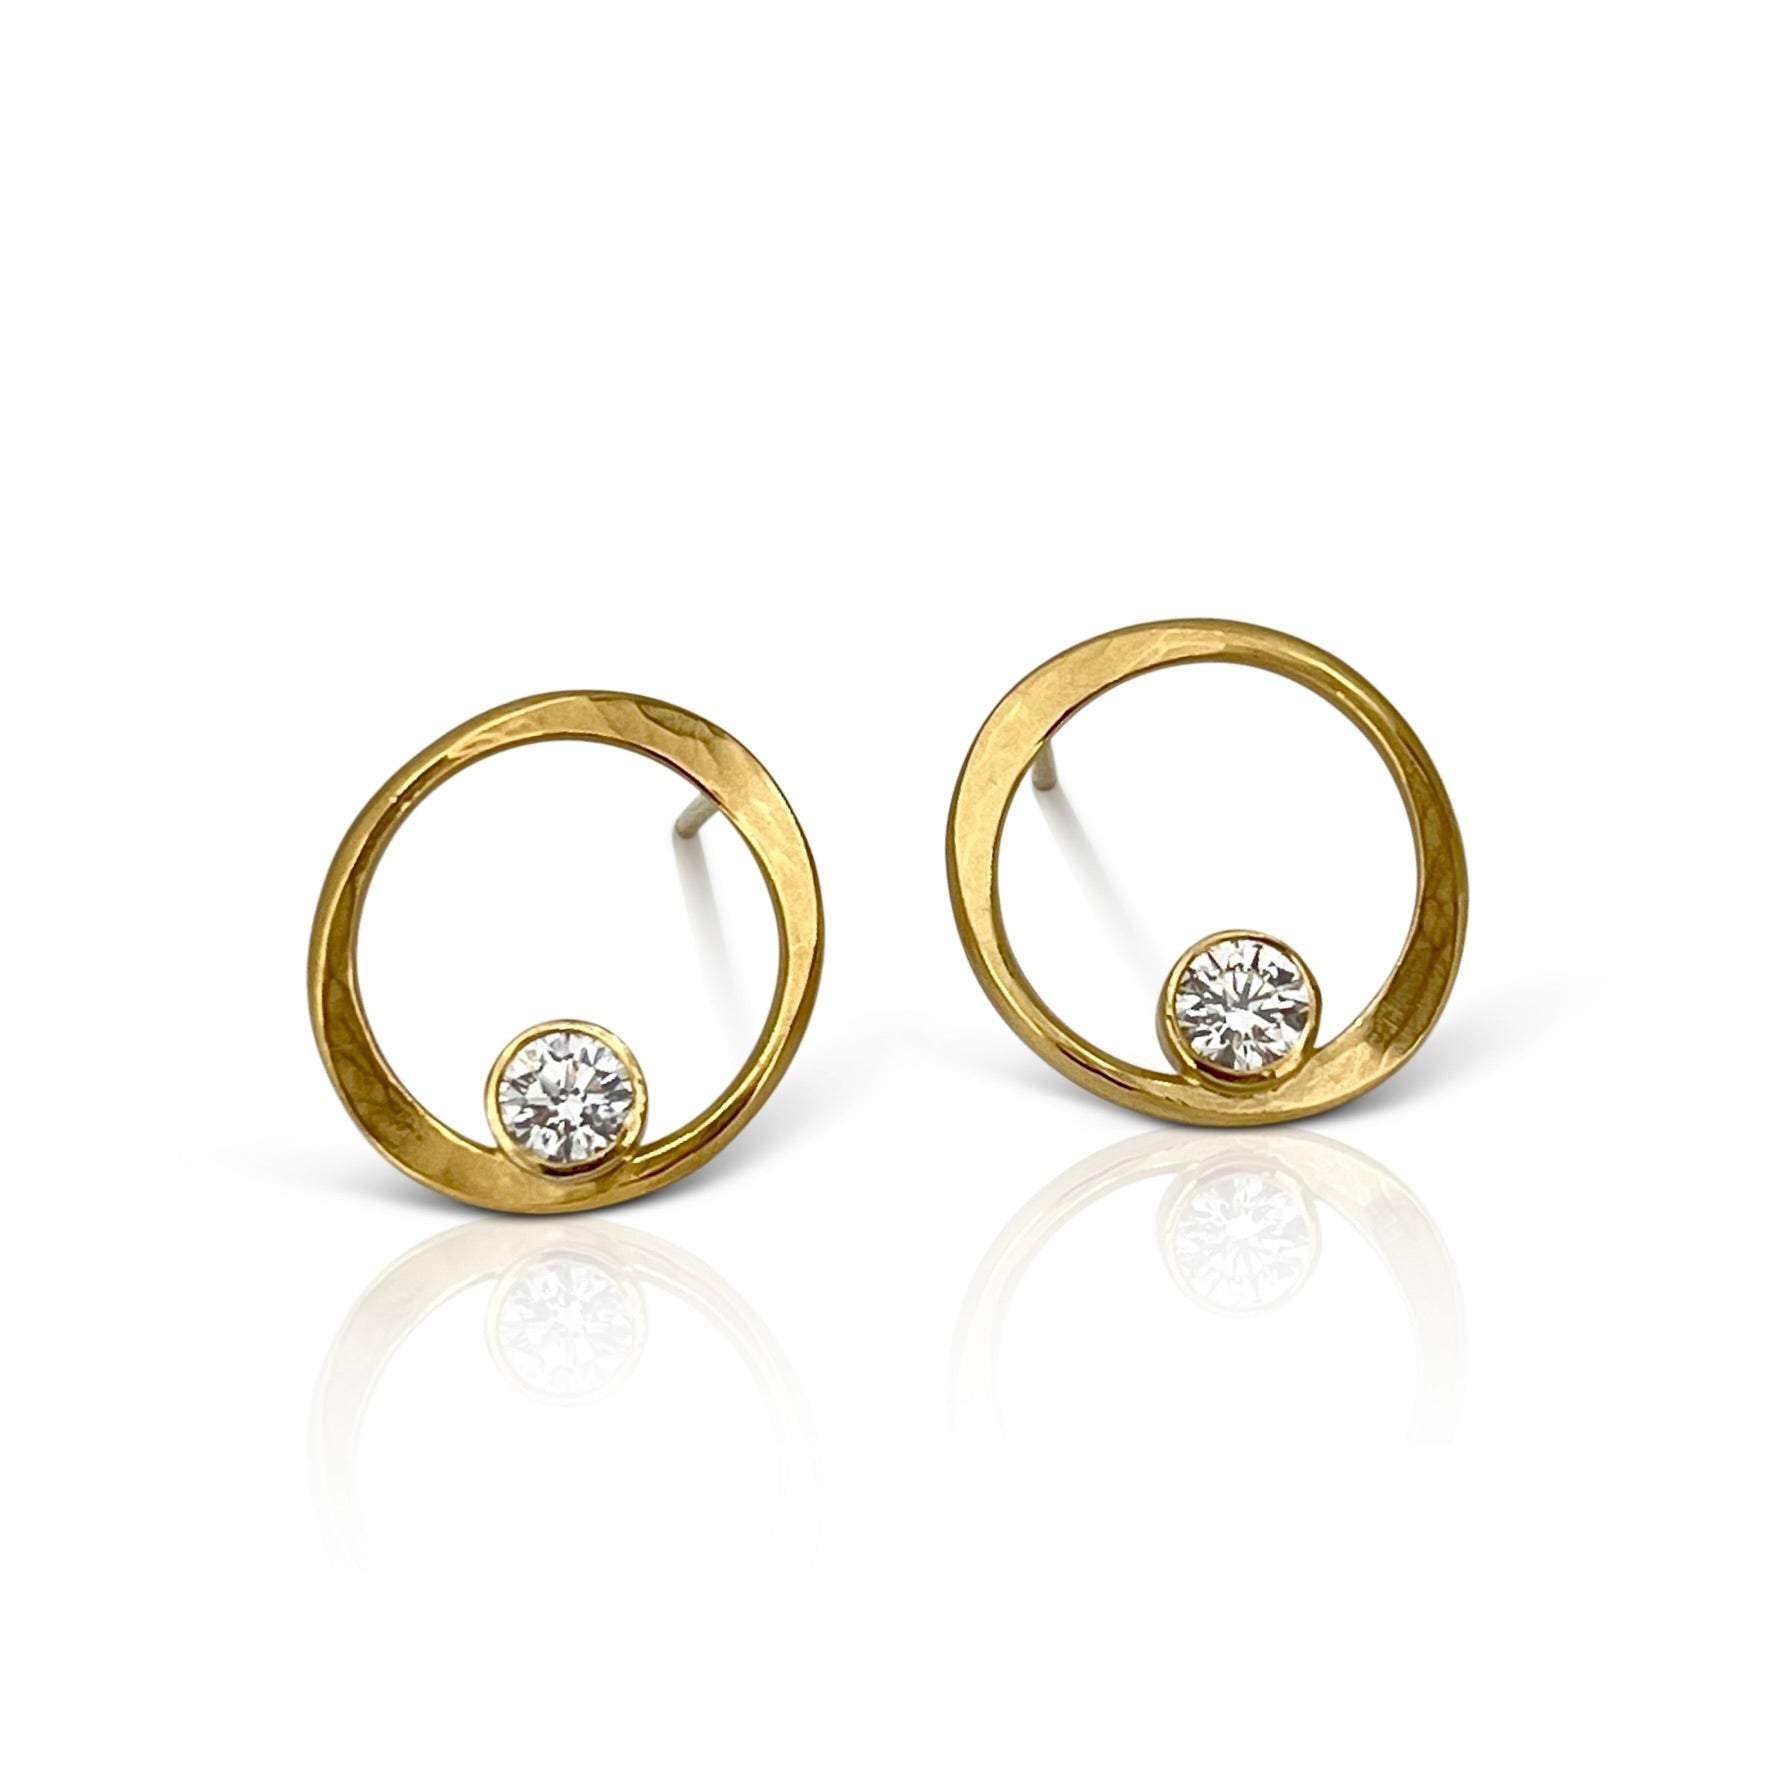 Petite V hoops sterling silver with Vermeil and diamonds by Ayesha Mayadas